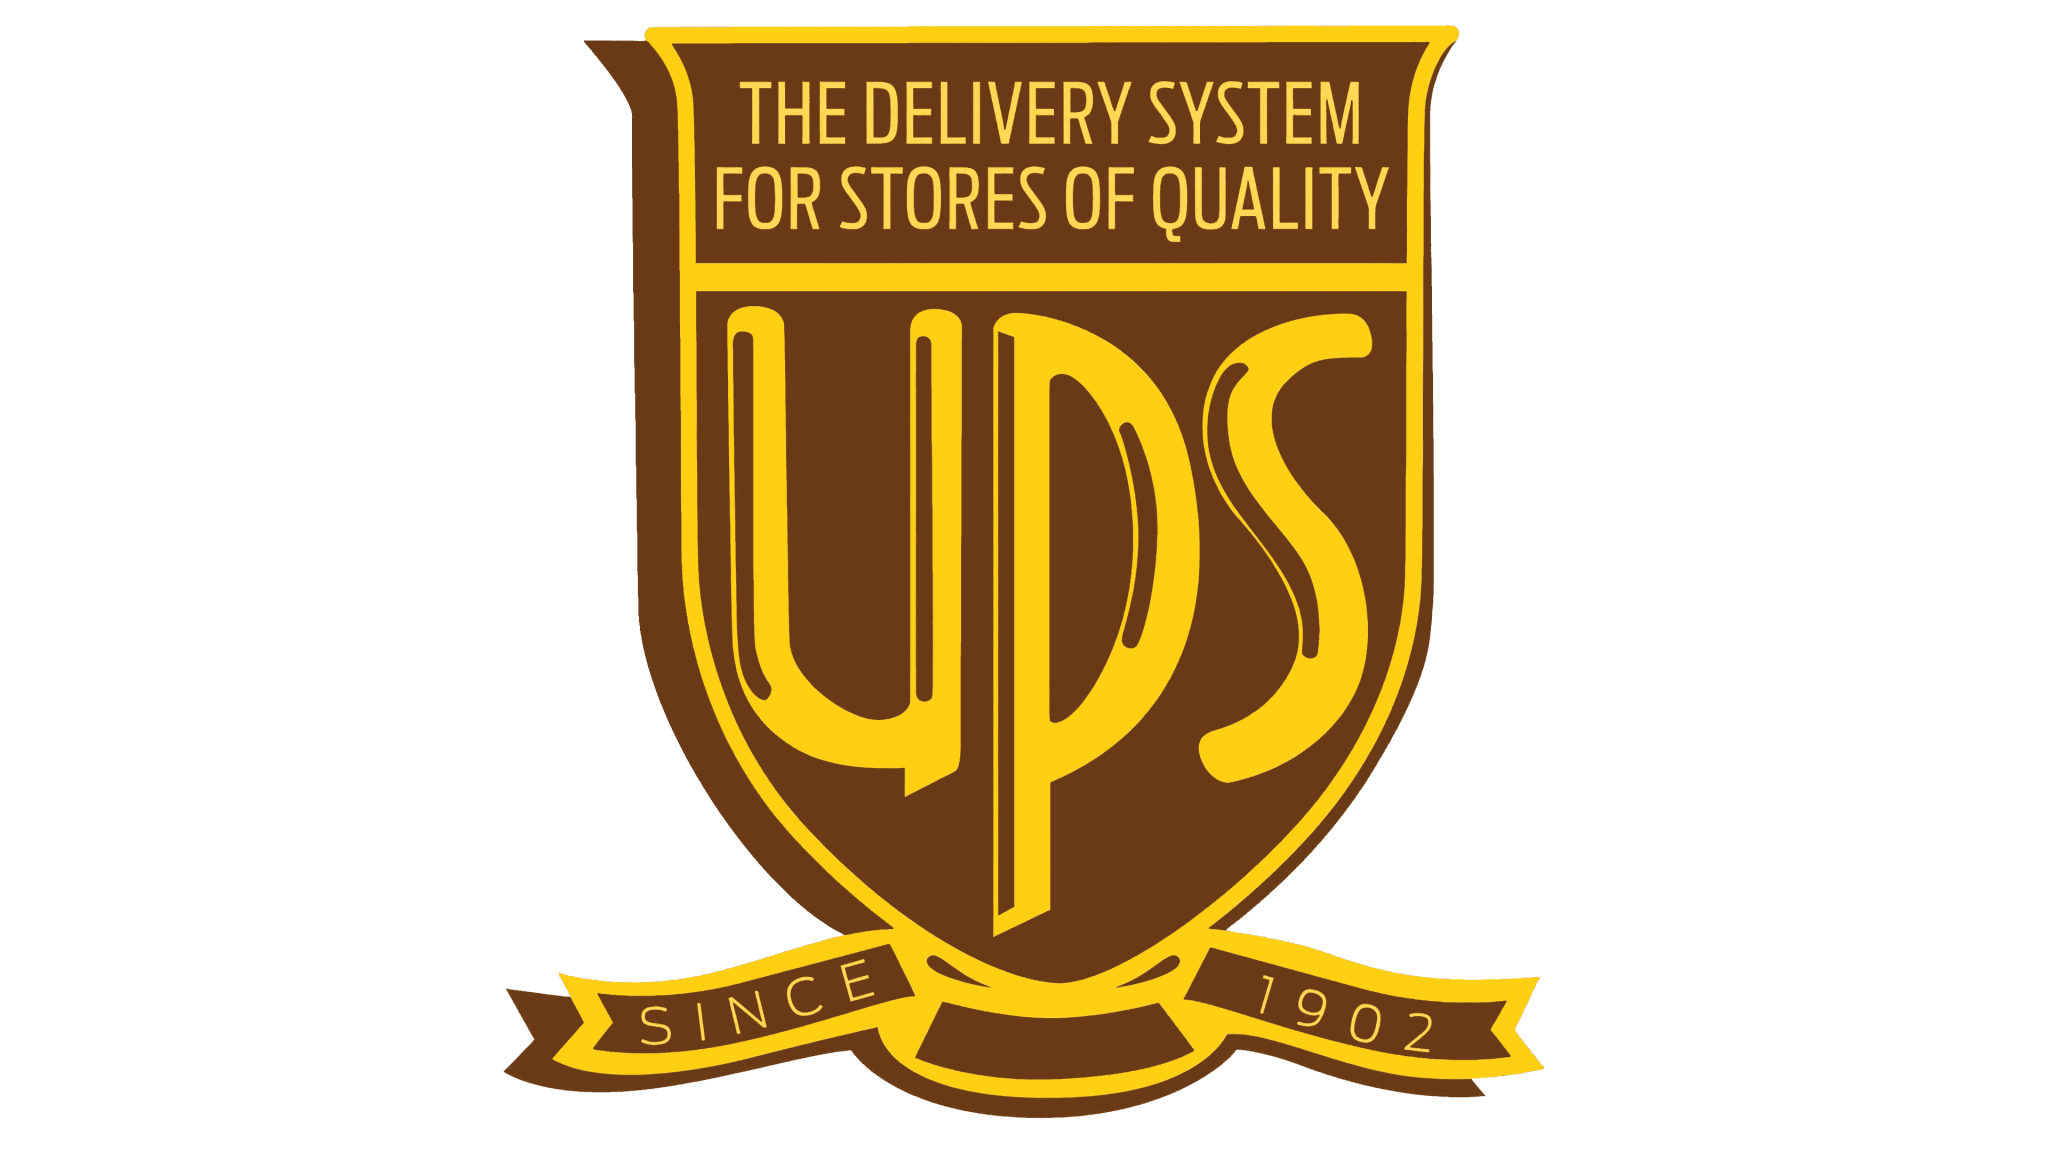 UPS Logo and symbol, meaning, history, sign.